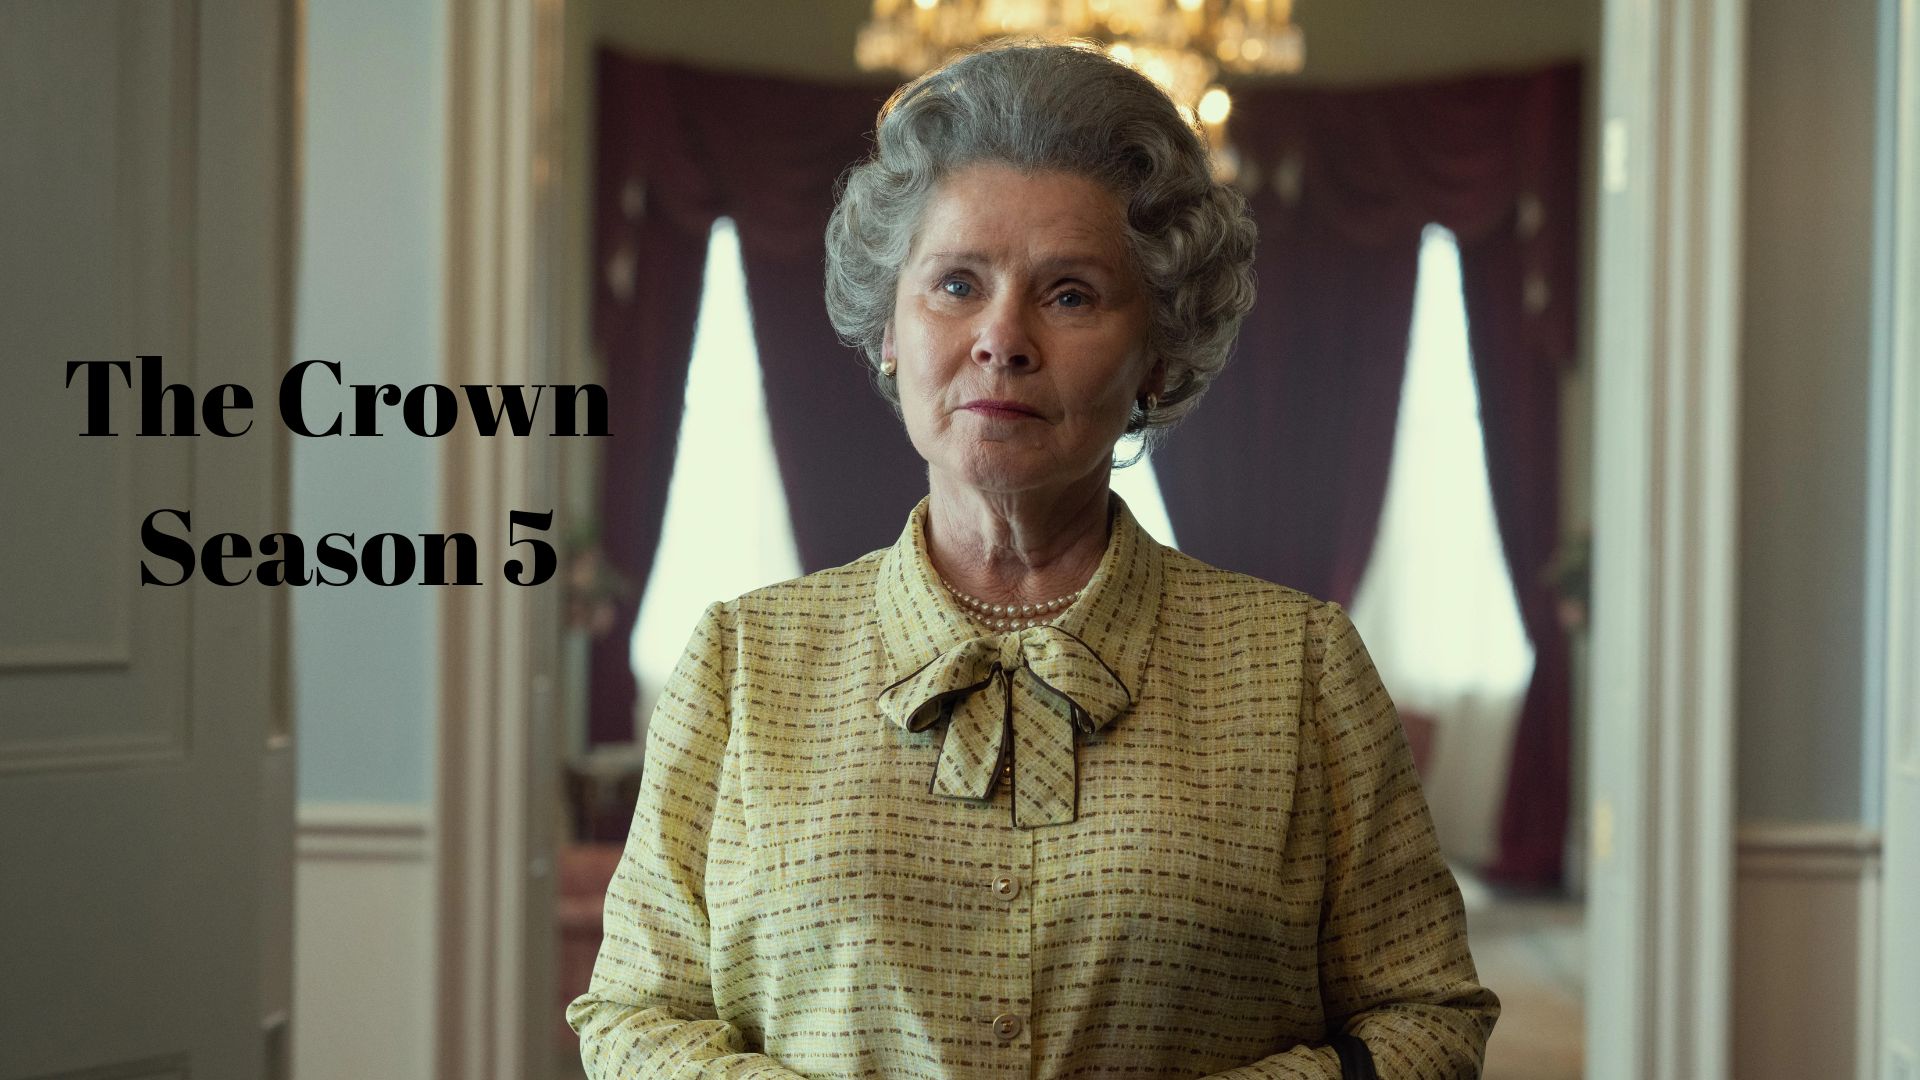 All You Need To Know About The Crown Season 5